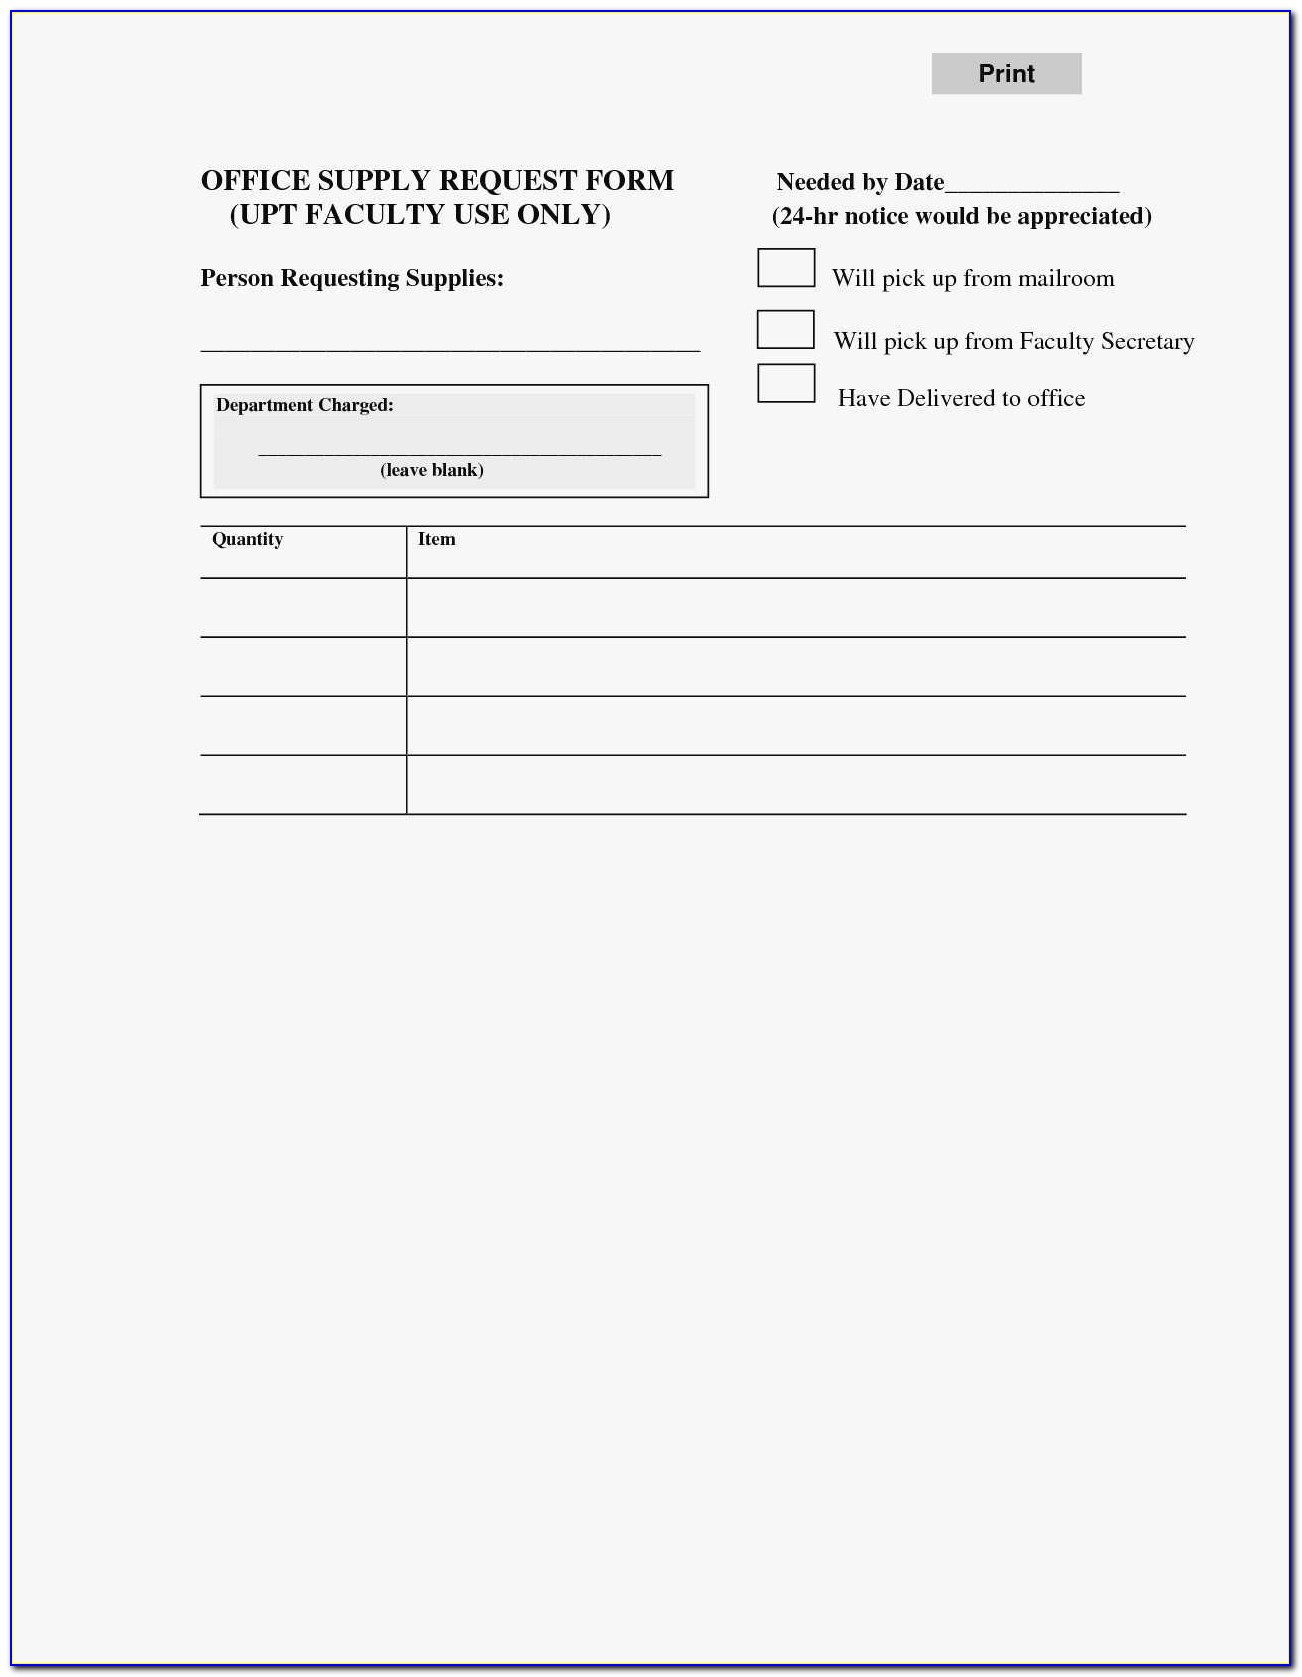 1099 Template 2016 Excel Elegant 50 Fresh S 1099 Misc Template For Preprinted Forms 2016